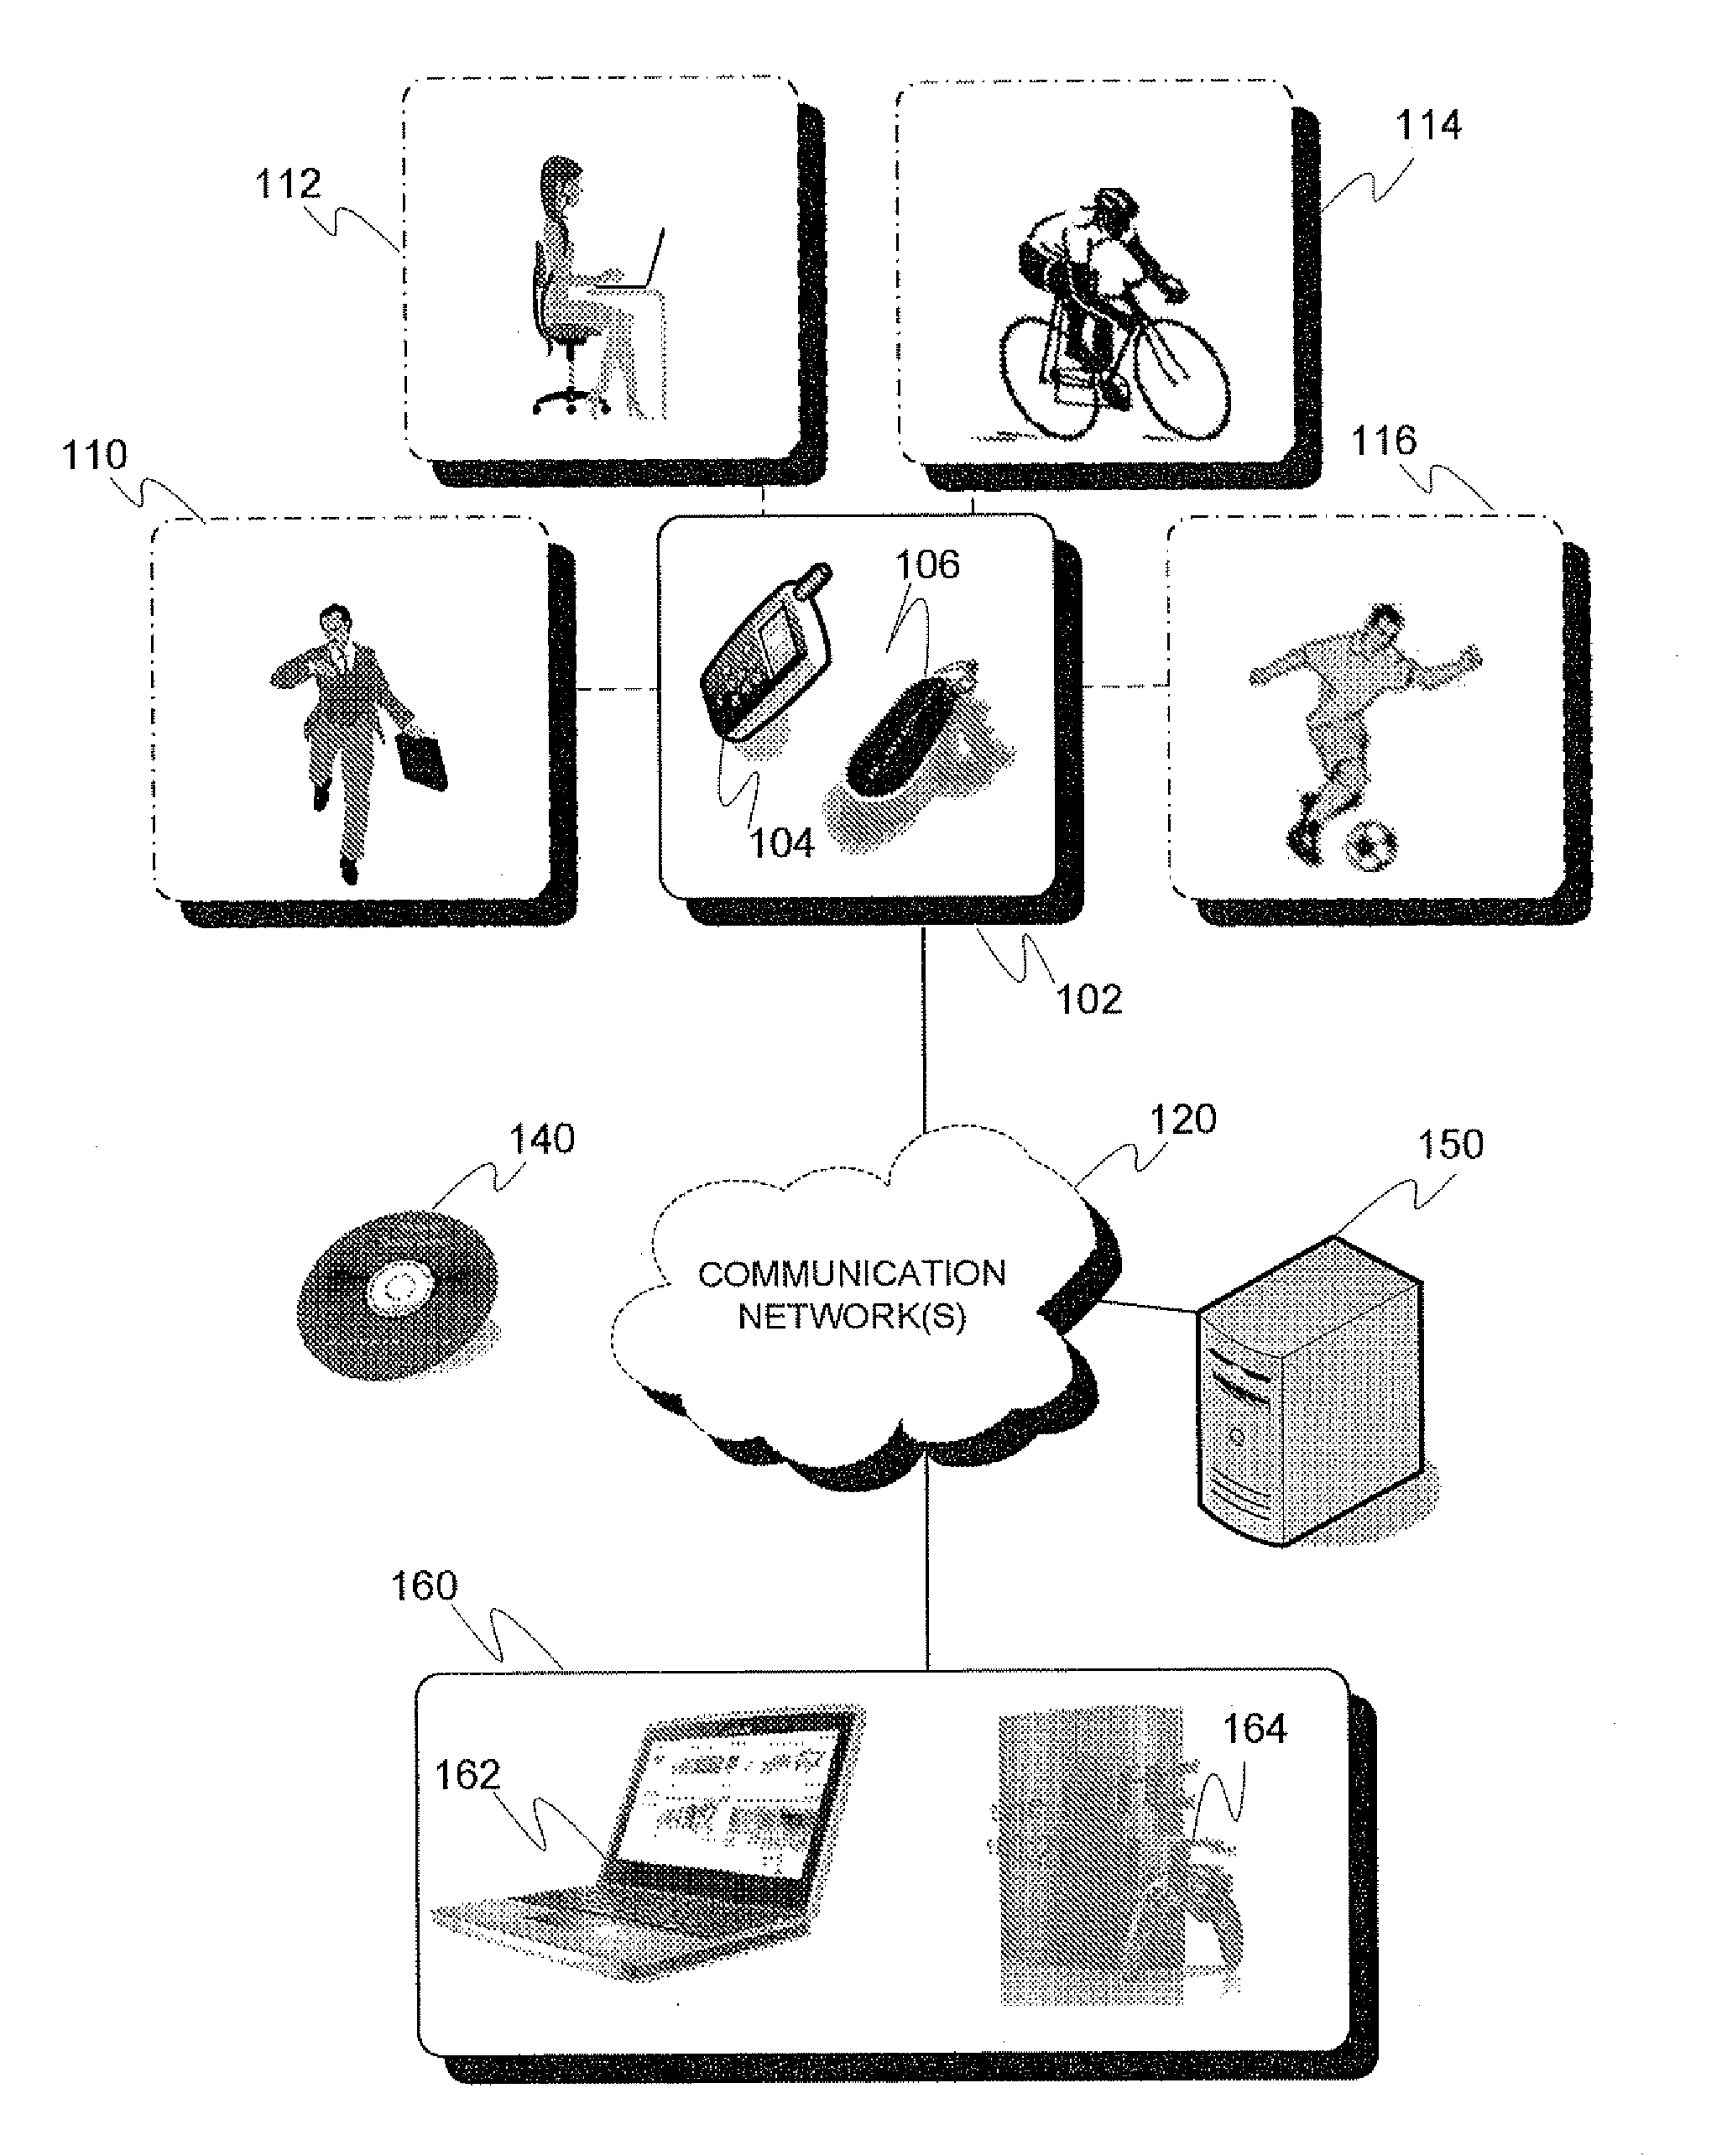 Physical activity-based device control